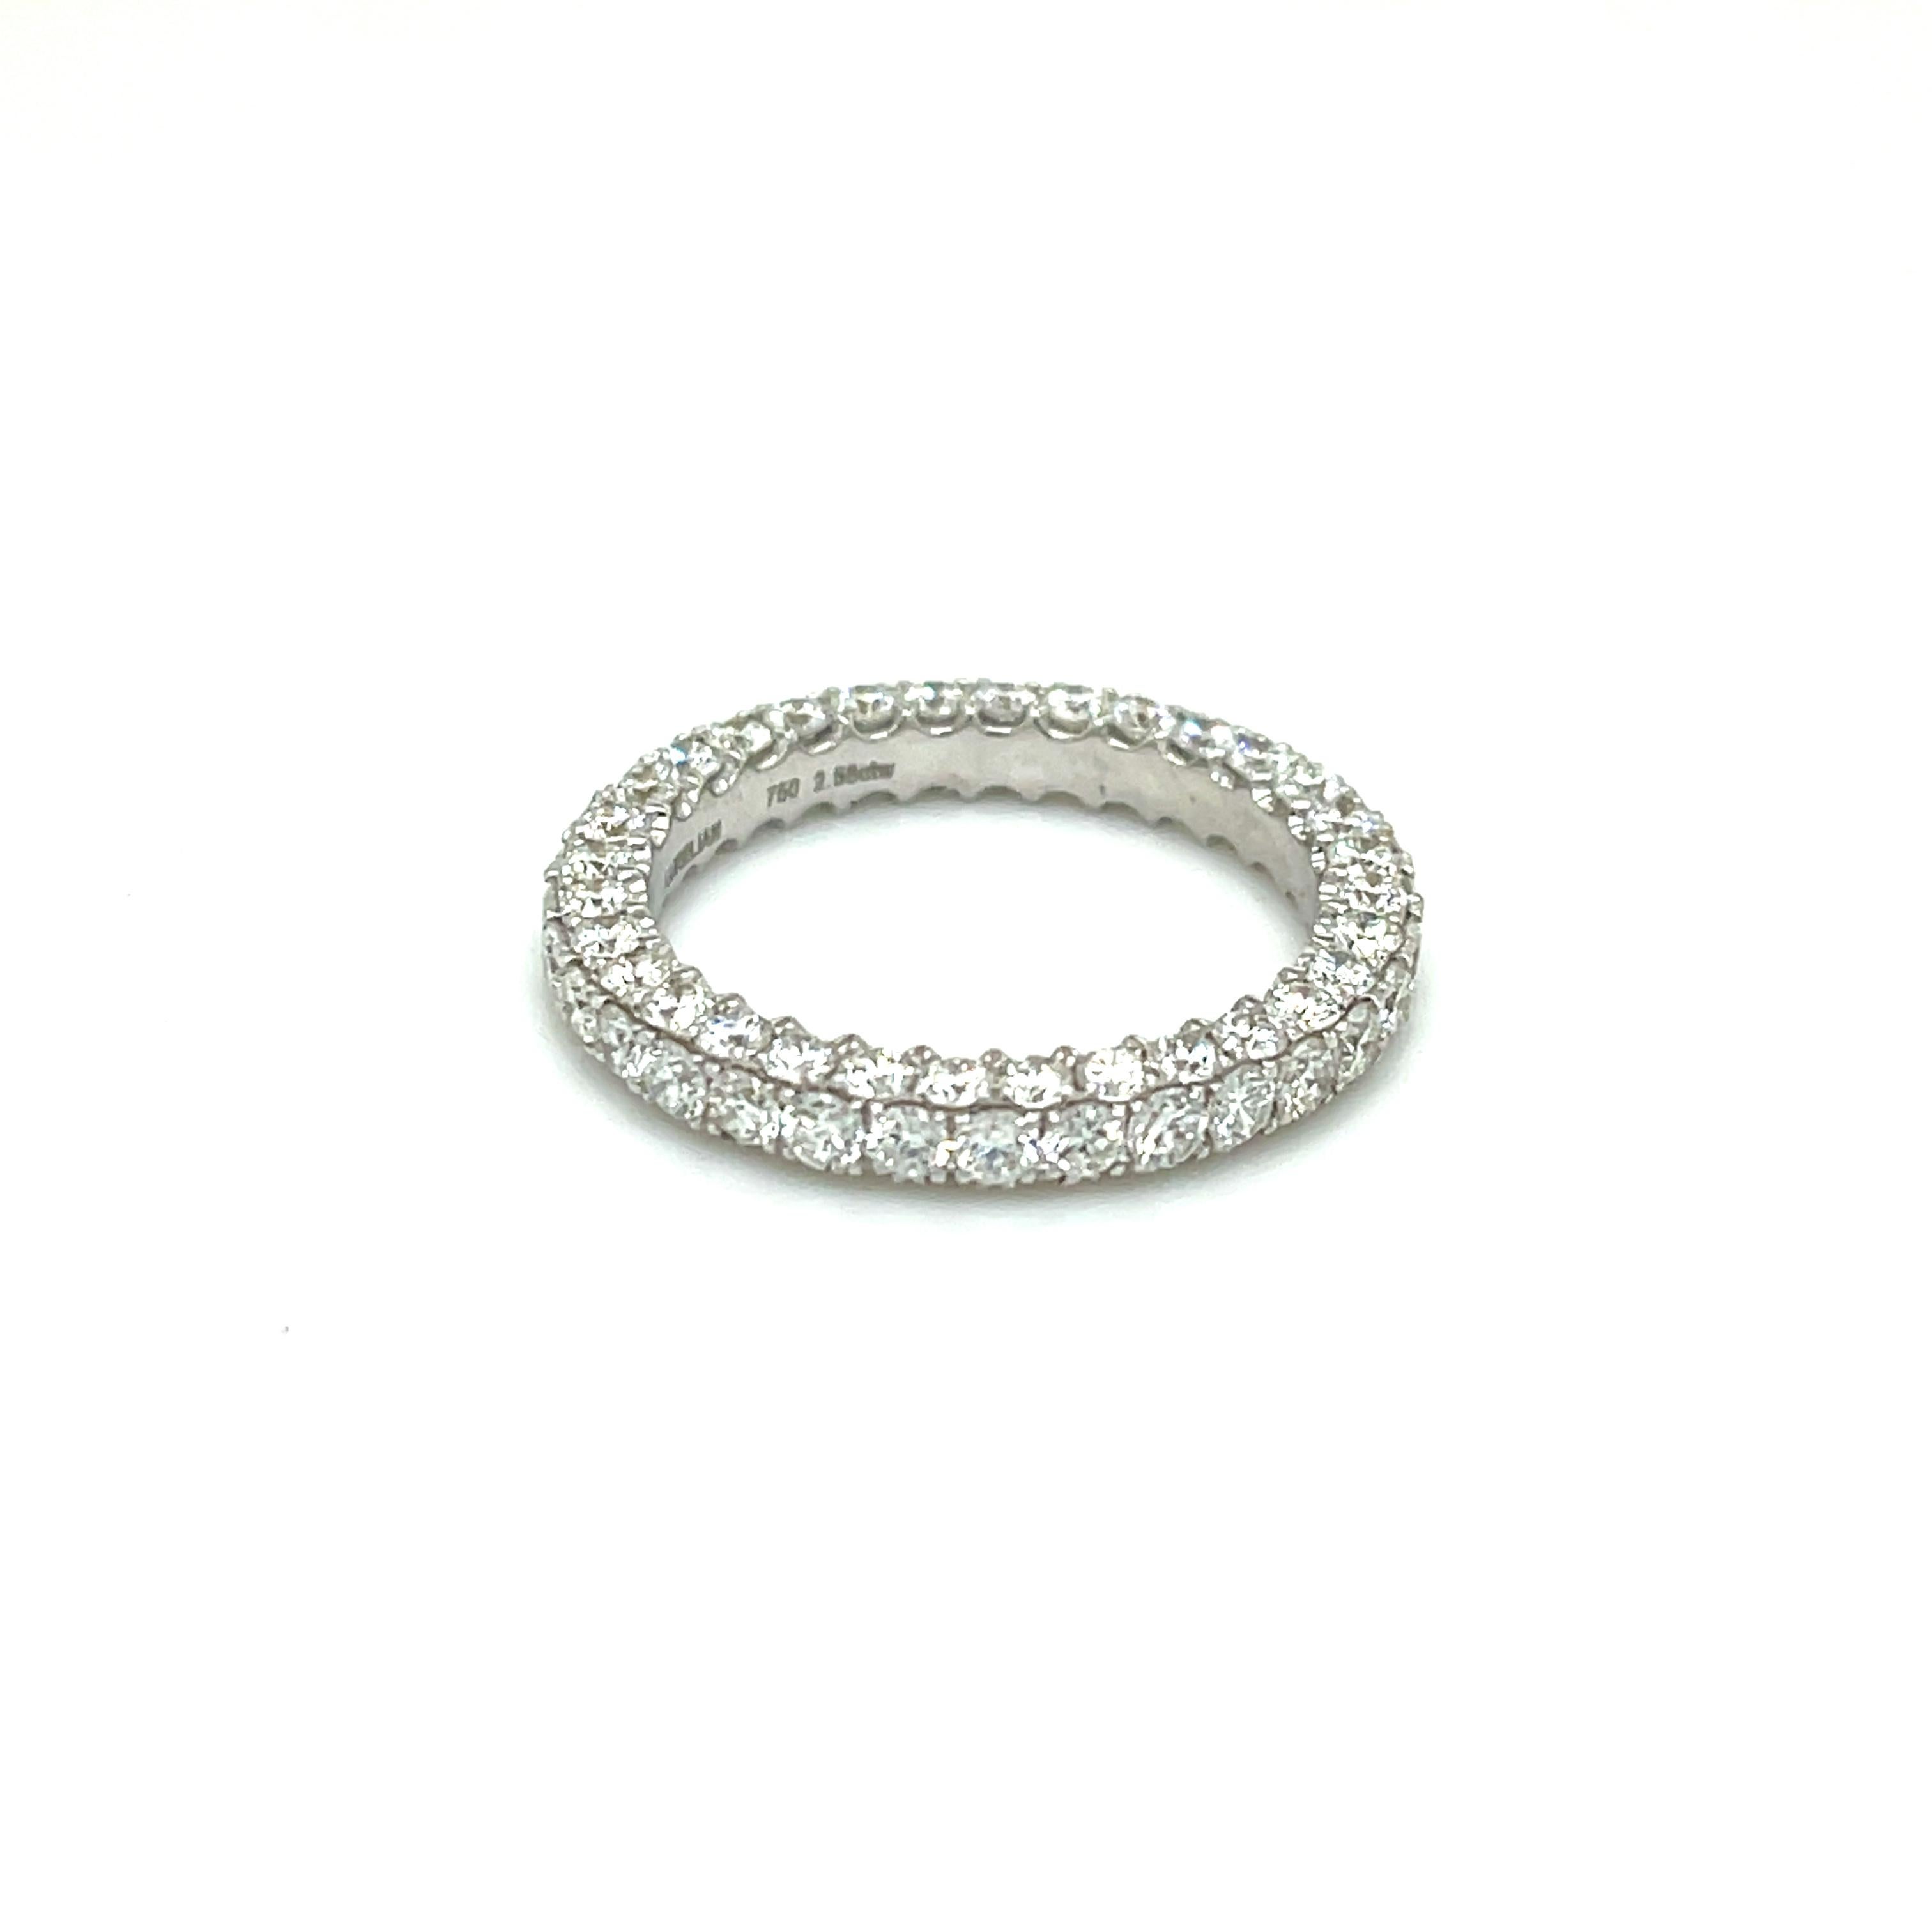 18KW 3 ROW WEDDING BAND WITH DIAMONDS
Metal: 18K White Gold
Diamond Info: H SI, 96 Round Brilliant Diamonds 
Total Diamond Weight: 2.56 cwt.
Item Weight:  3.18 gm
Ring Size:   6 (Not re-sizable)
Measurements:  2.95 mm x 2.60 mm
